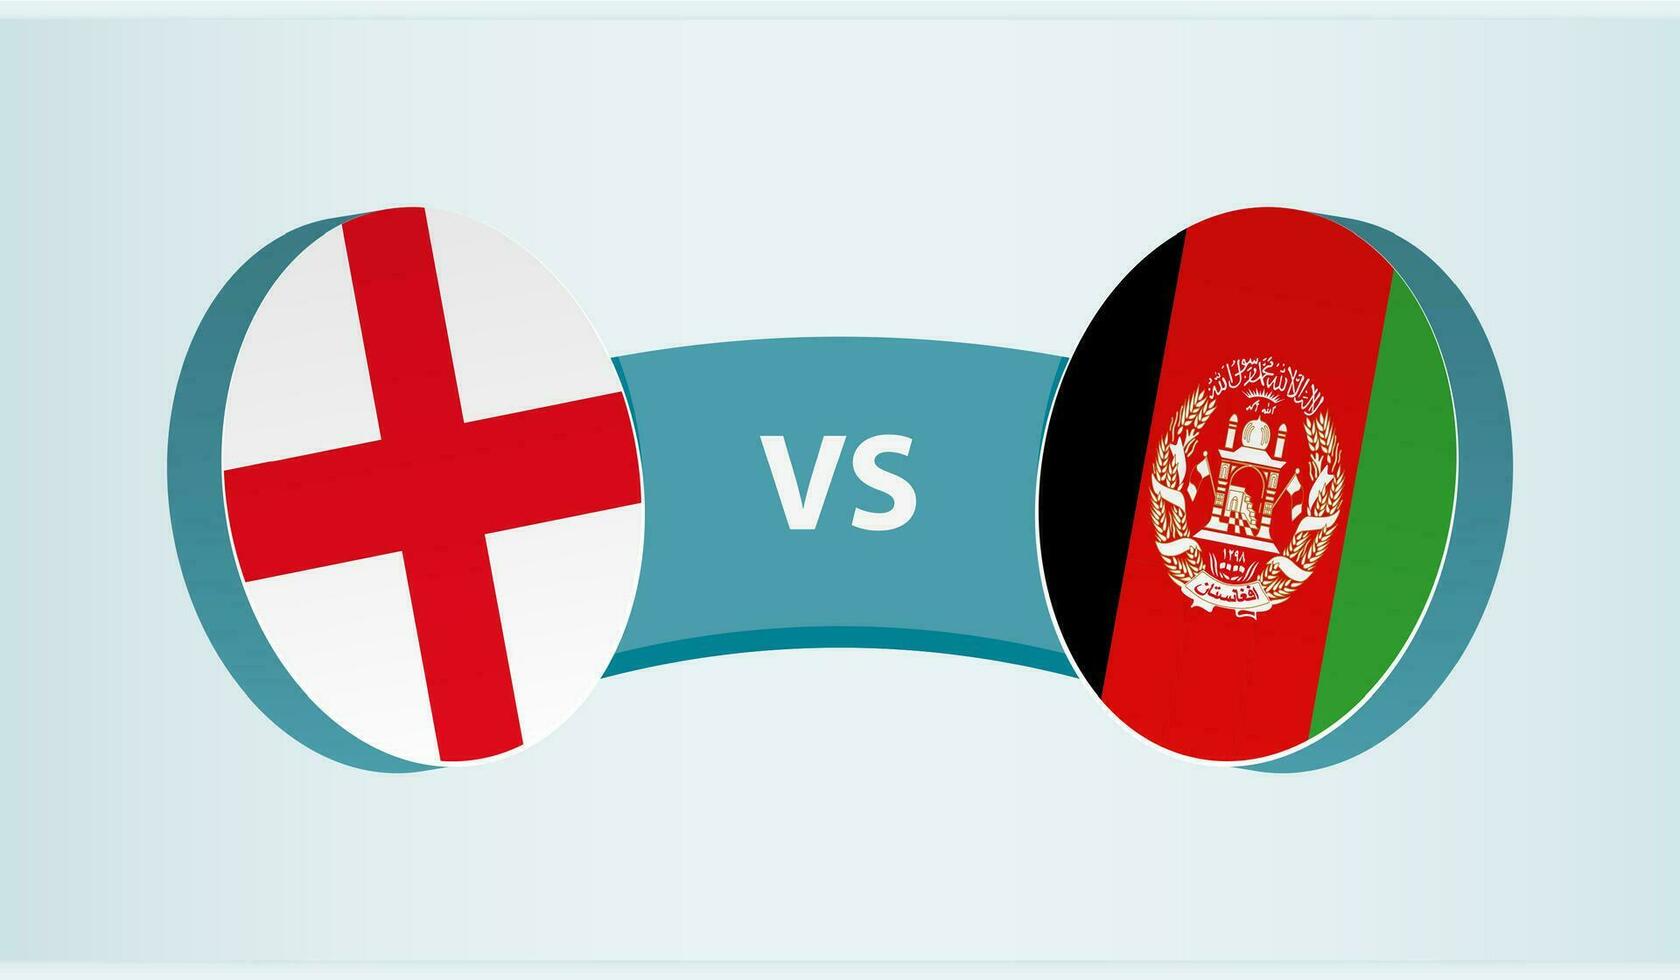 England versus Afghanistan, team sports competition concept. vector